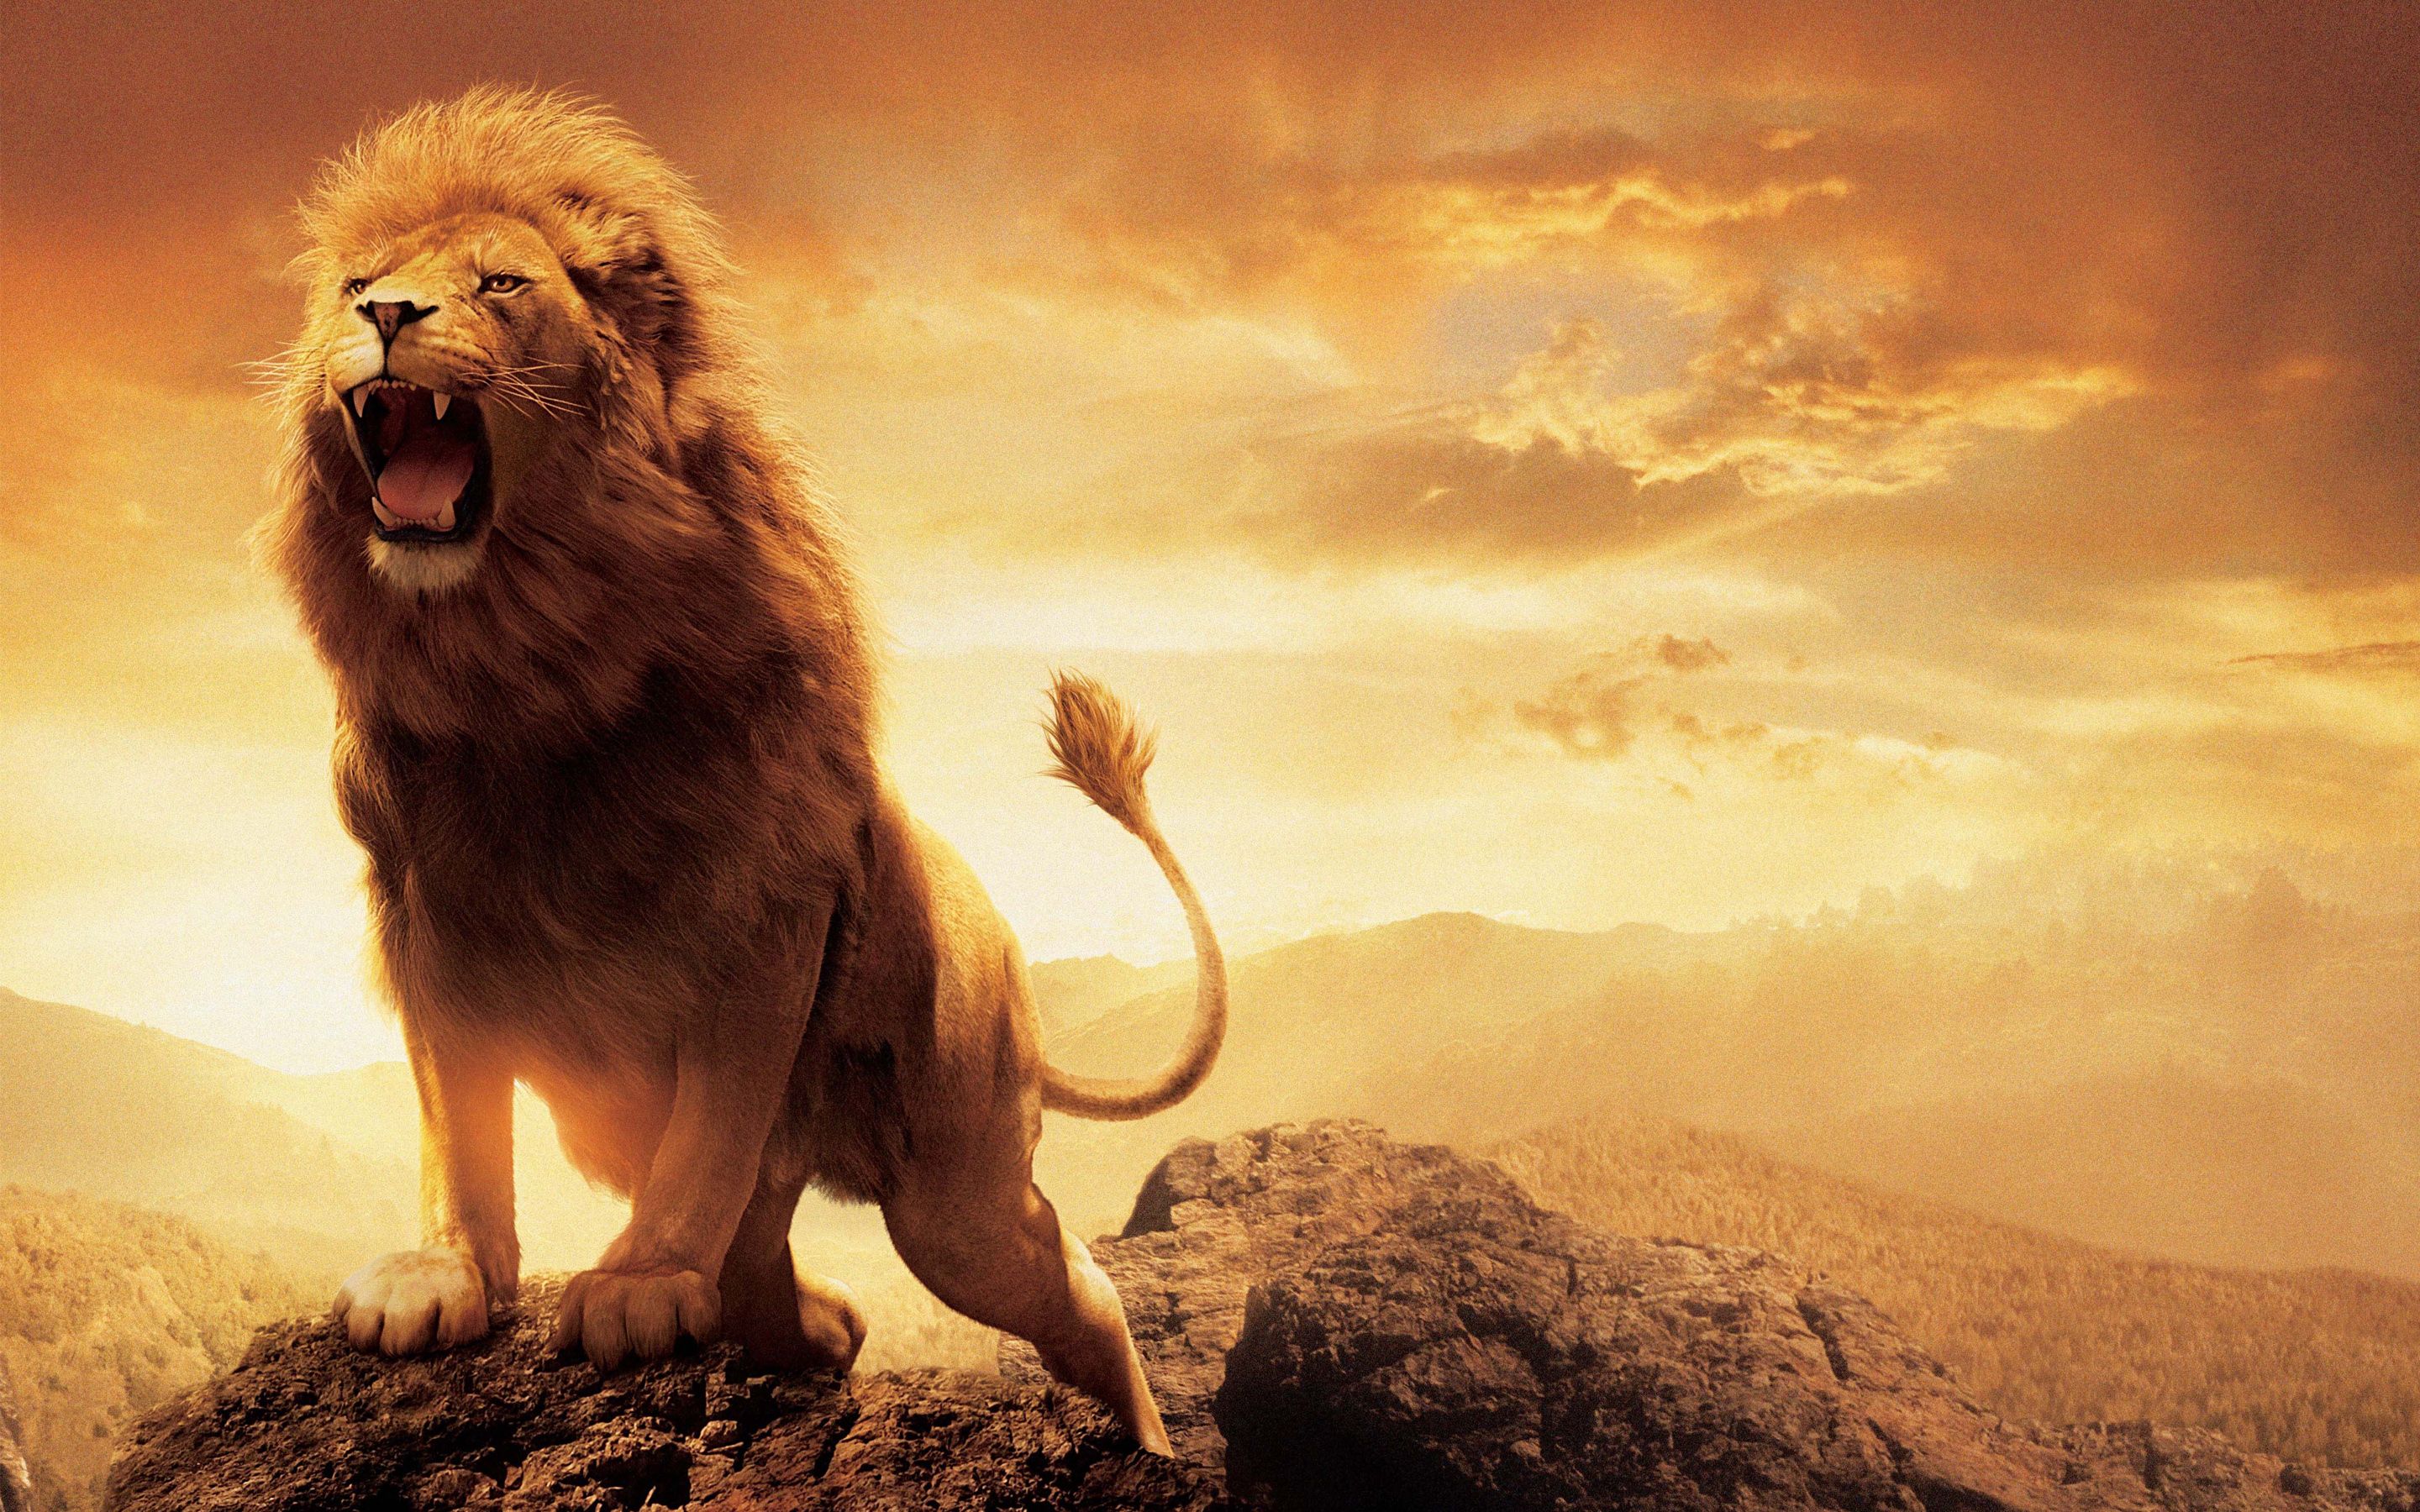 The Chronicles of Narnia: The Lion, the Witch and the Wardrobe HD Wallpaper and Background Image